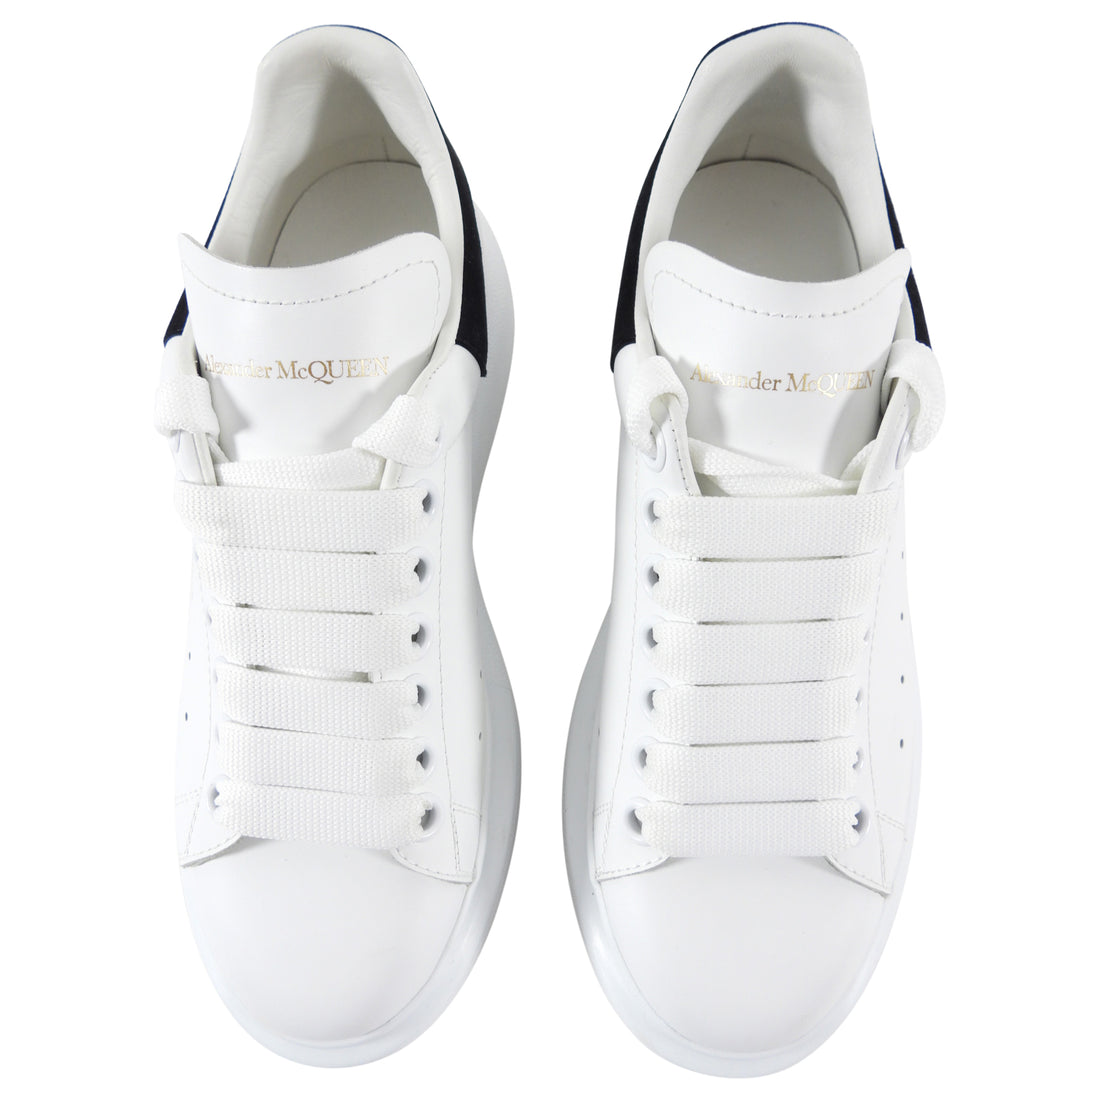 Alexander McQueen White Sneakers with Black - USA 6